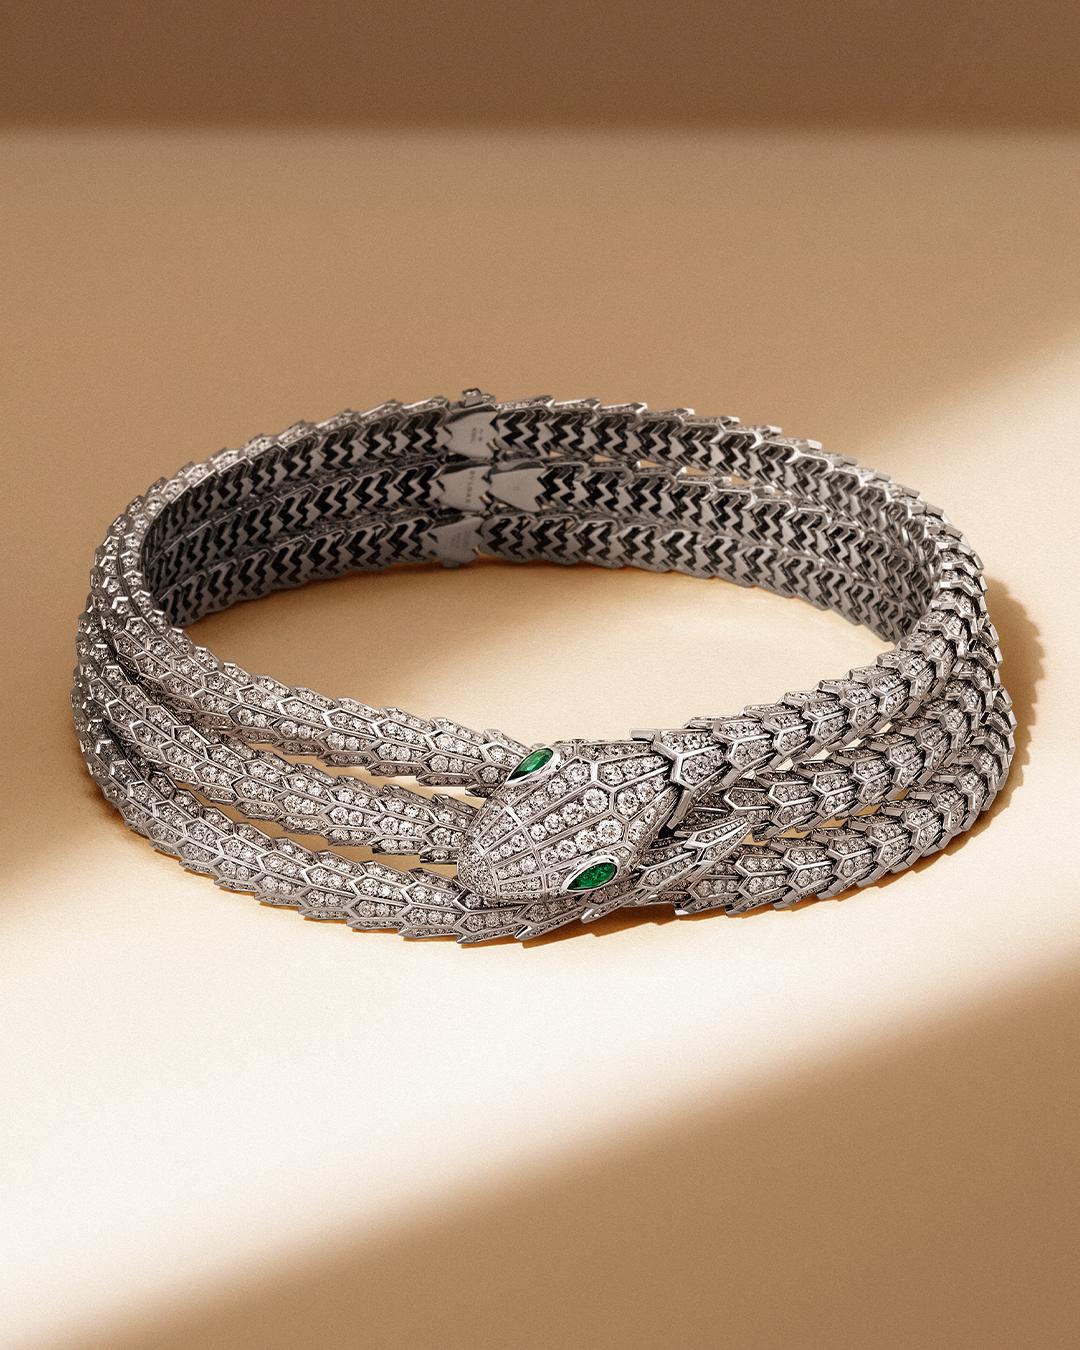 An exquisite piece by BVLGARI, this exclusive style has stunned on the red carpet and is a must have for any collector. The coils of the serpent are set with 60.34 carats of D-F color, Internally Flawless-VVS round diamonds. Its eyes are two pear